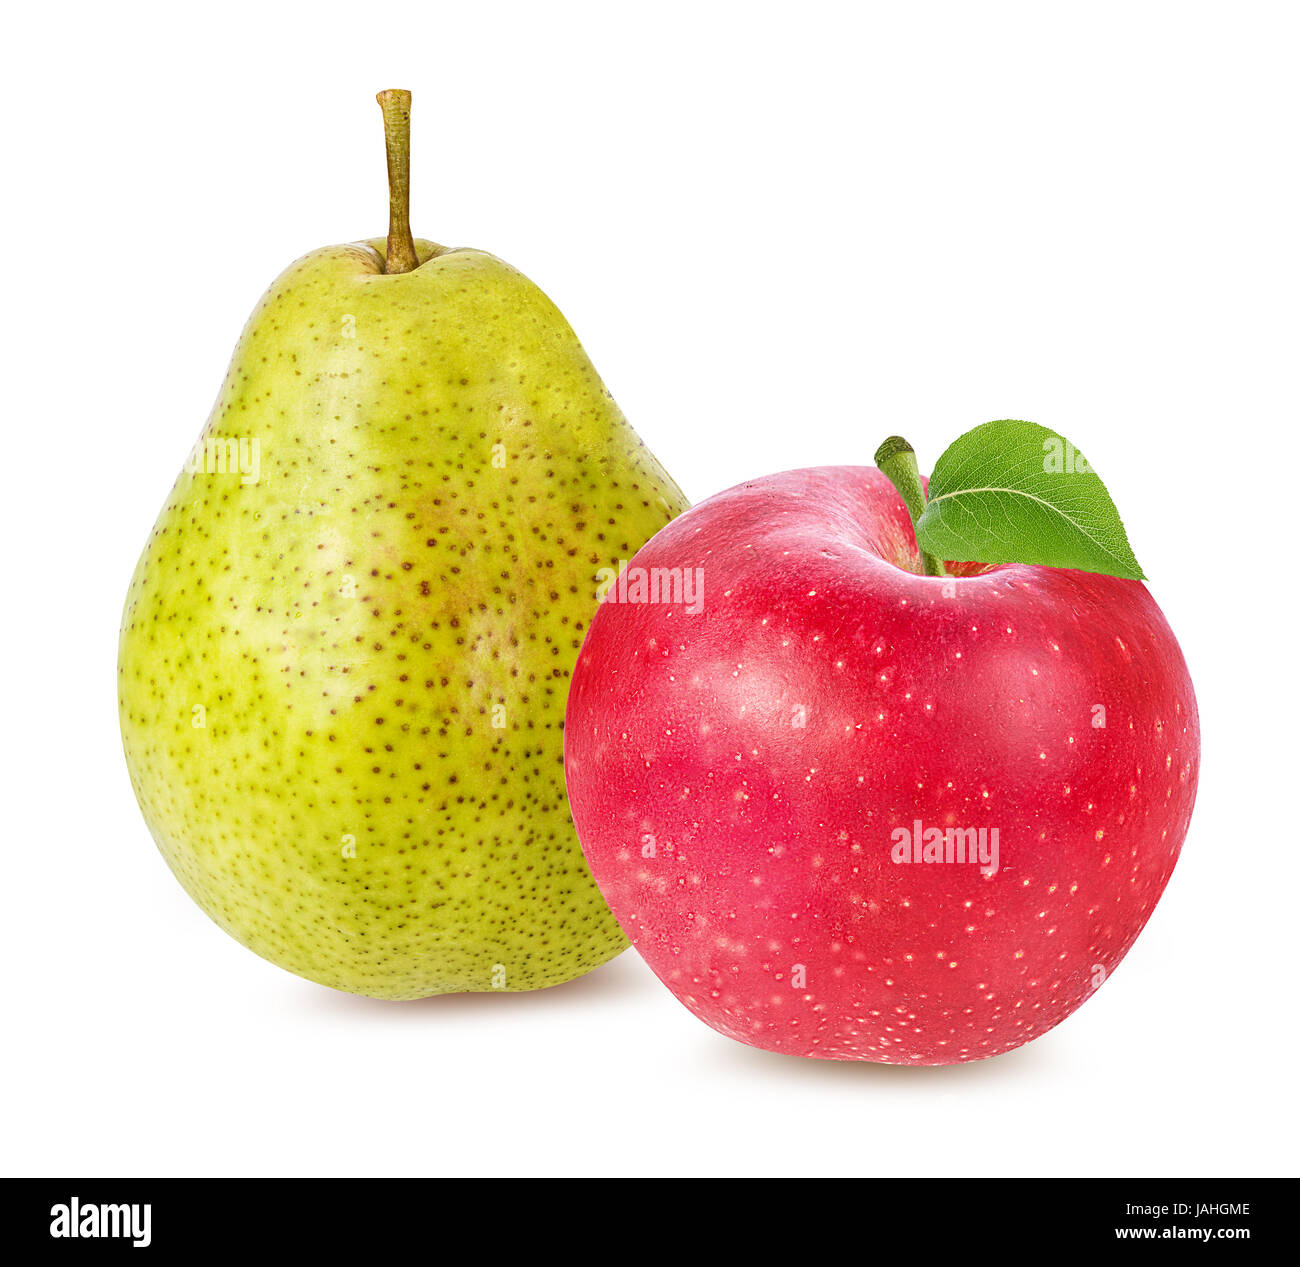 apple  and pear isolated on white background Stock Photo